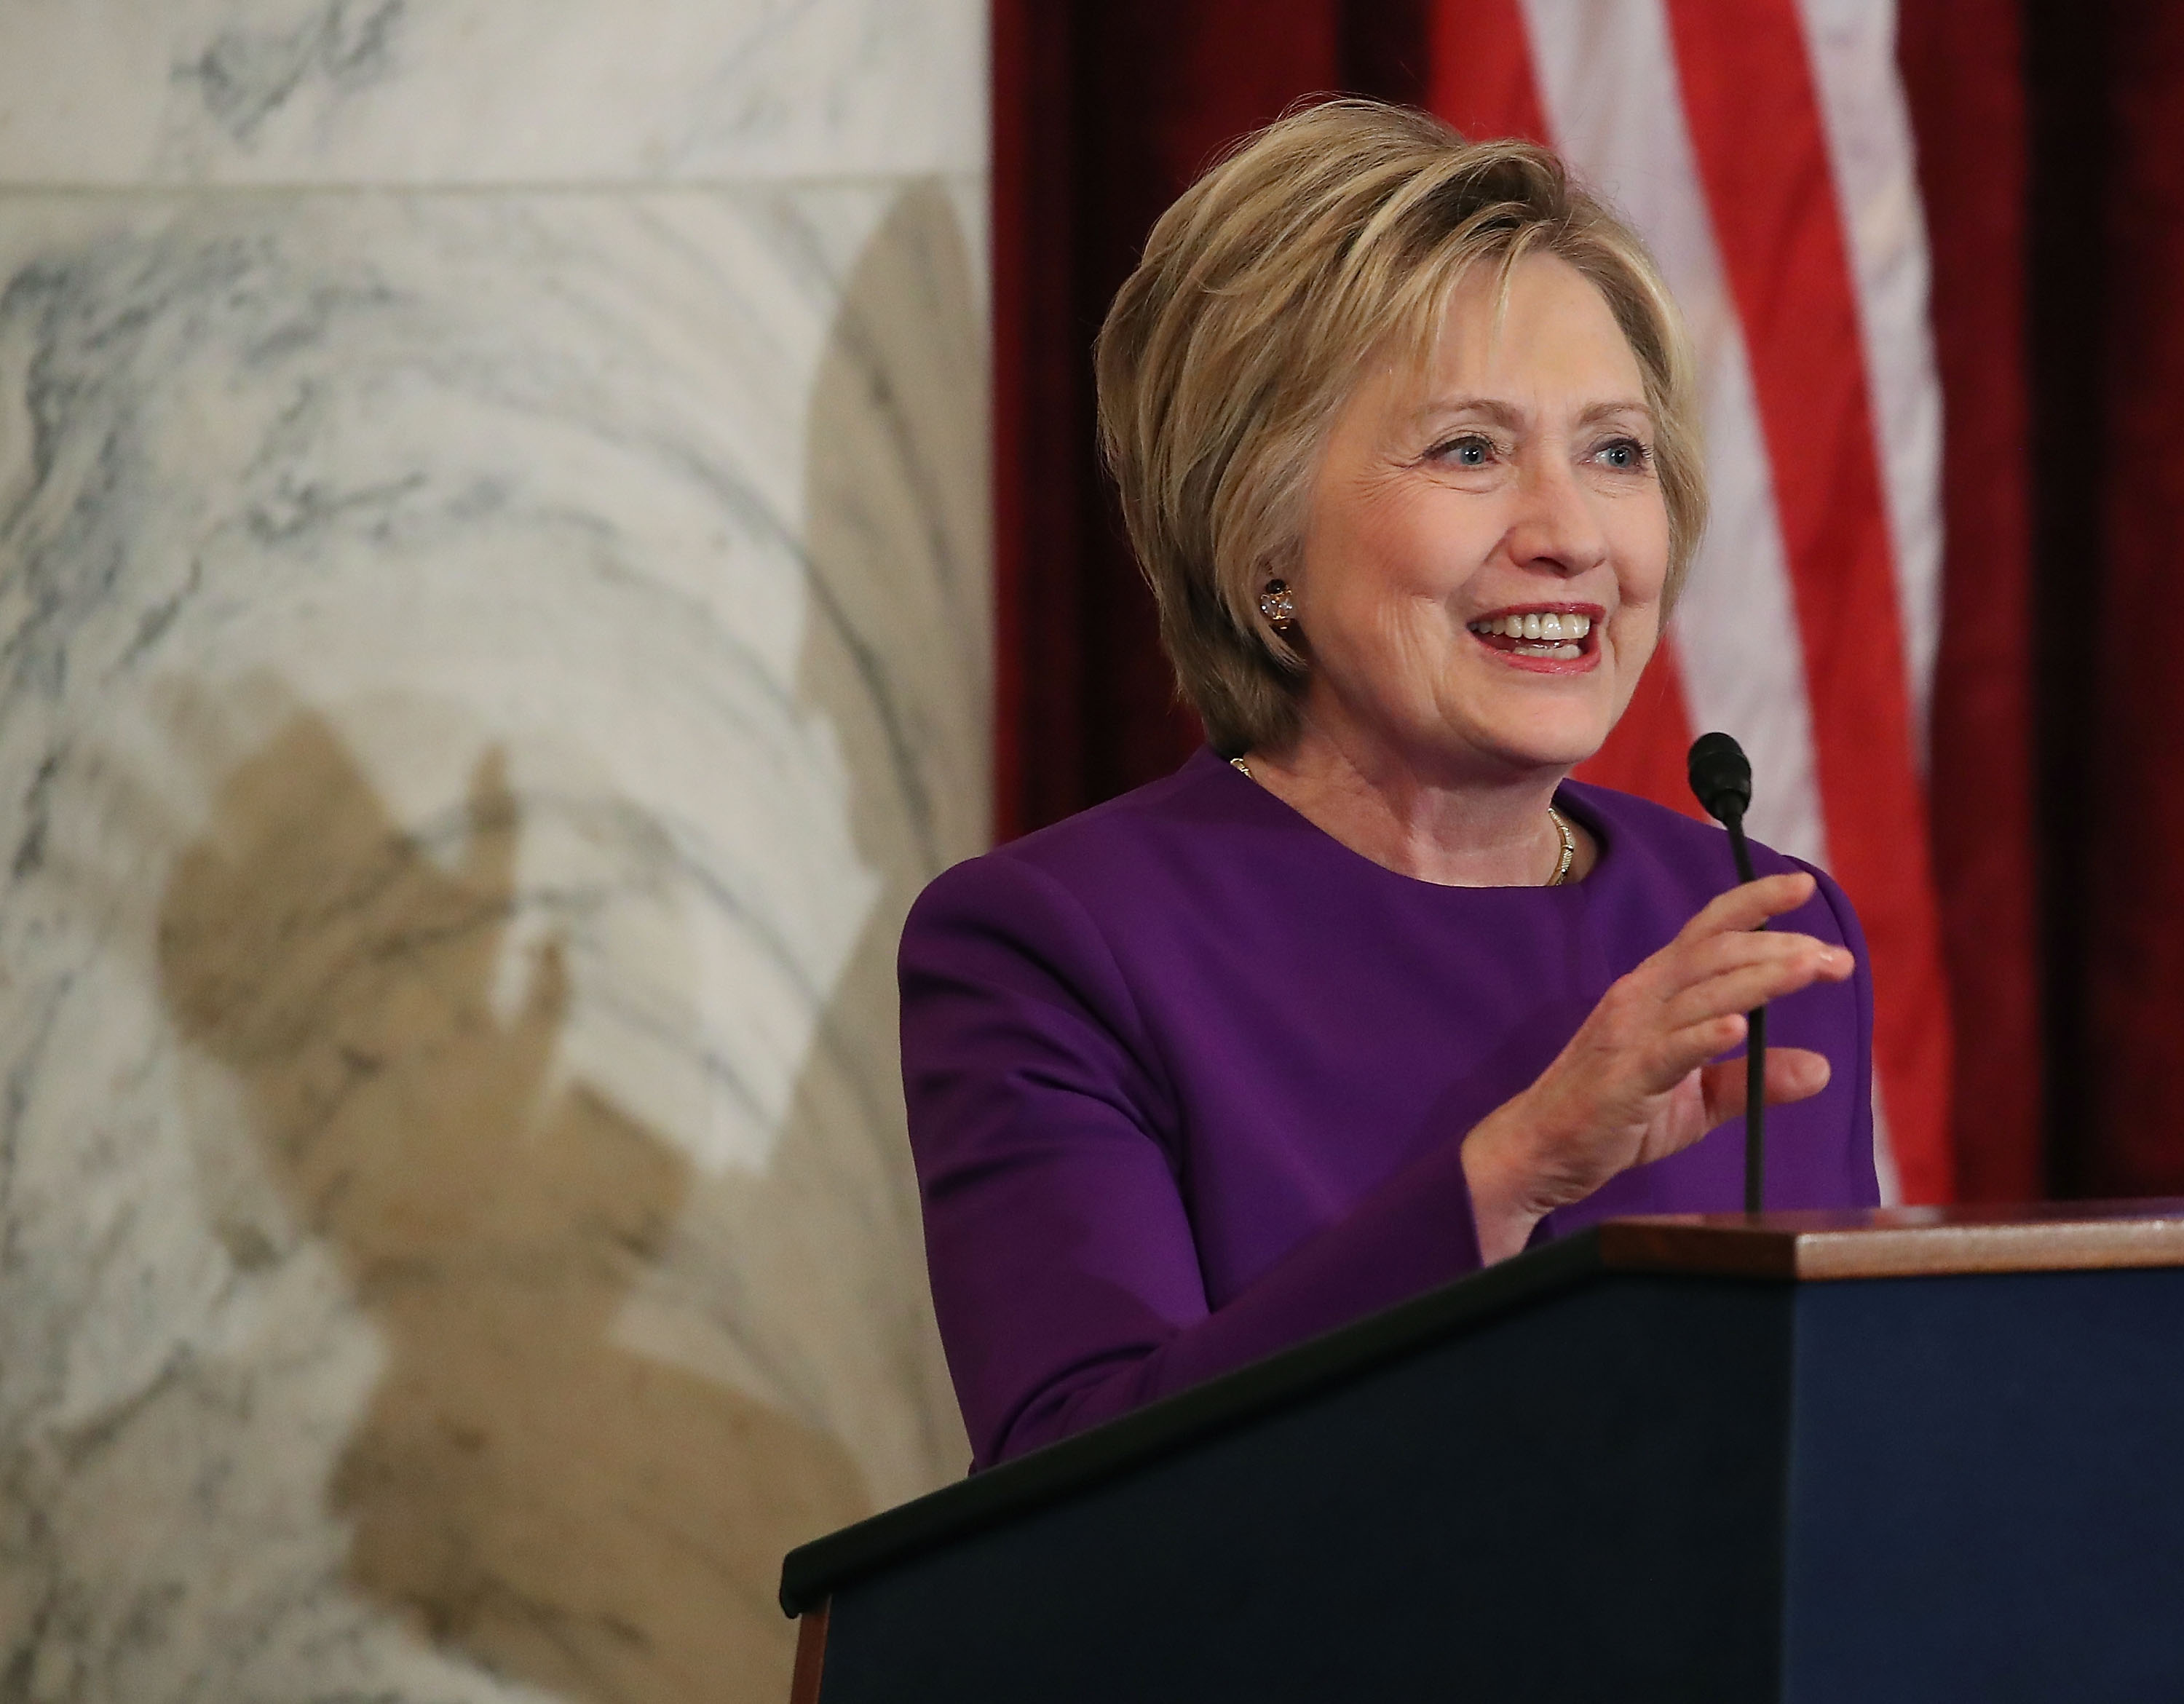 Former US Secretary of State, Hillary Clinton is applauded before speaking at a portrait unveiling ceremony for outgoing Senate Minority Leader Harry Reid (D-NV), on Capitol Hill December 8, 2016 in Washington, DC. (Mark Wilson&mdash;Getty Images)